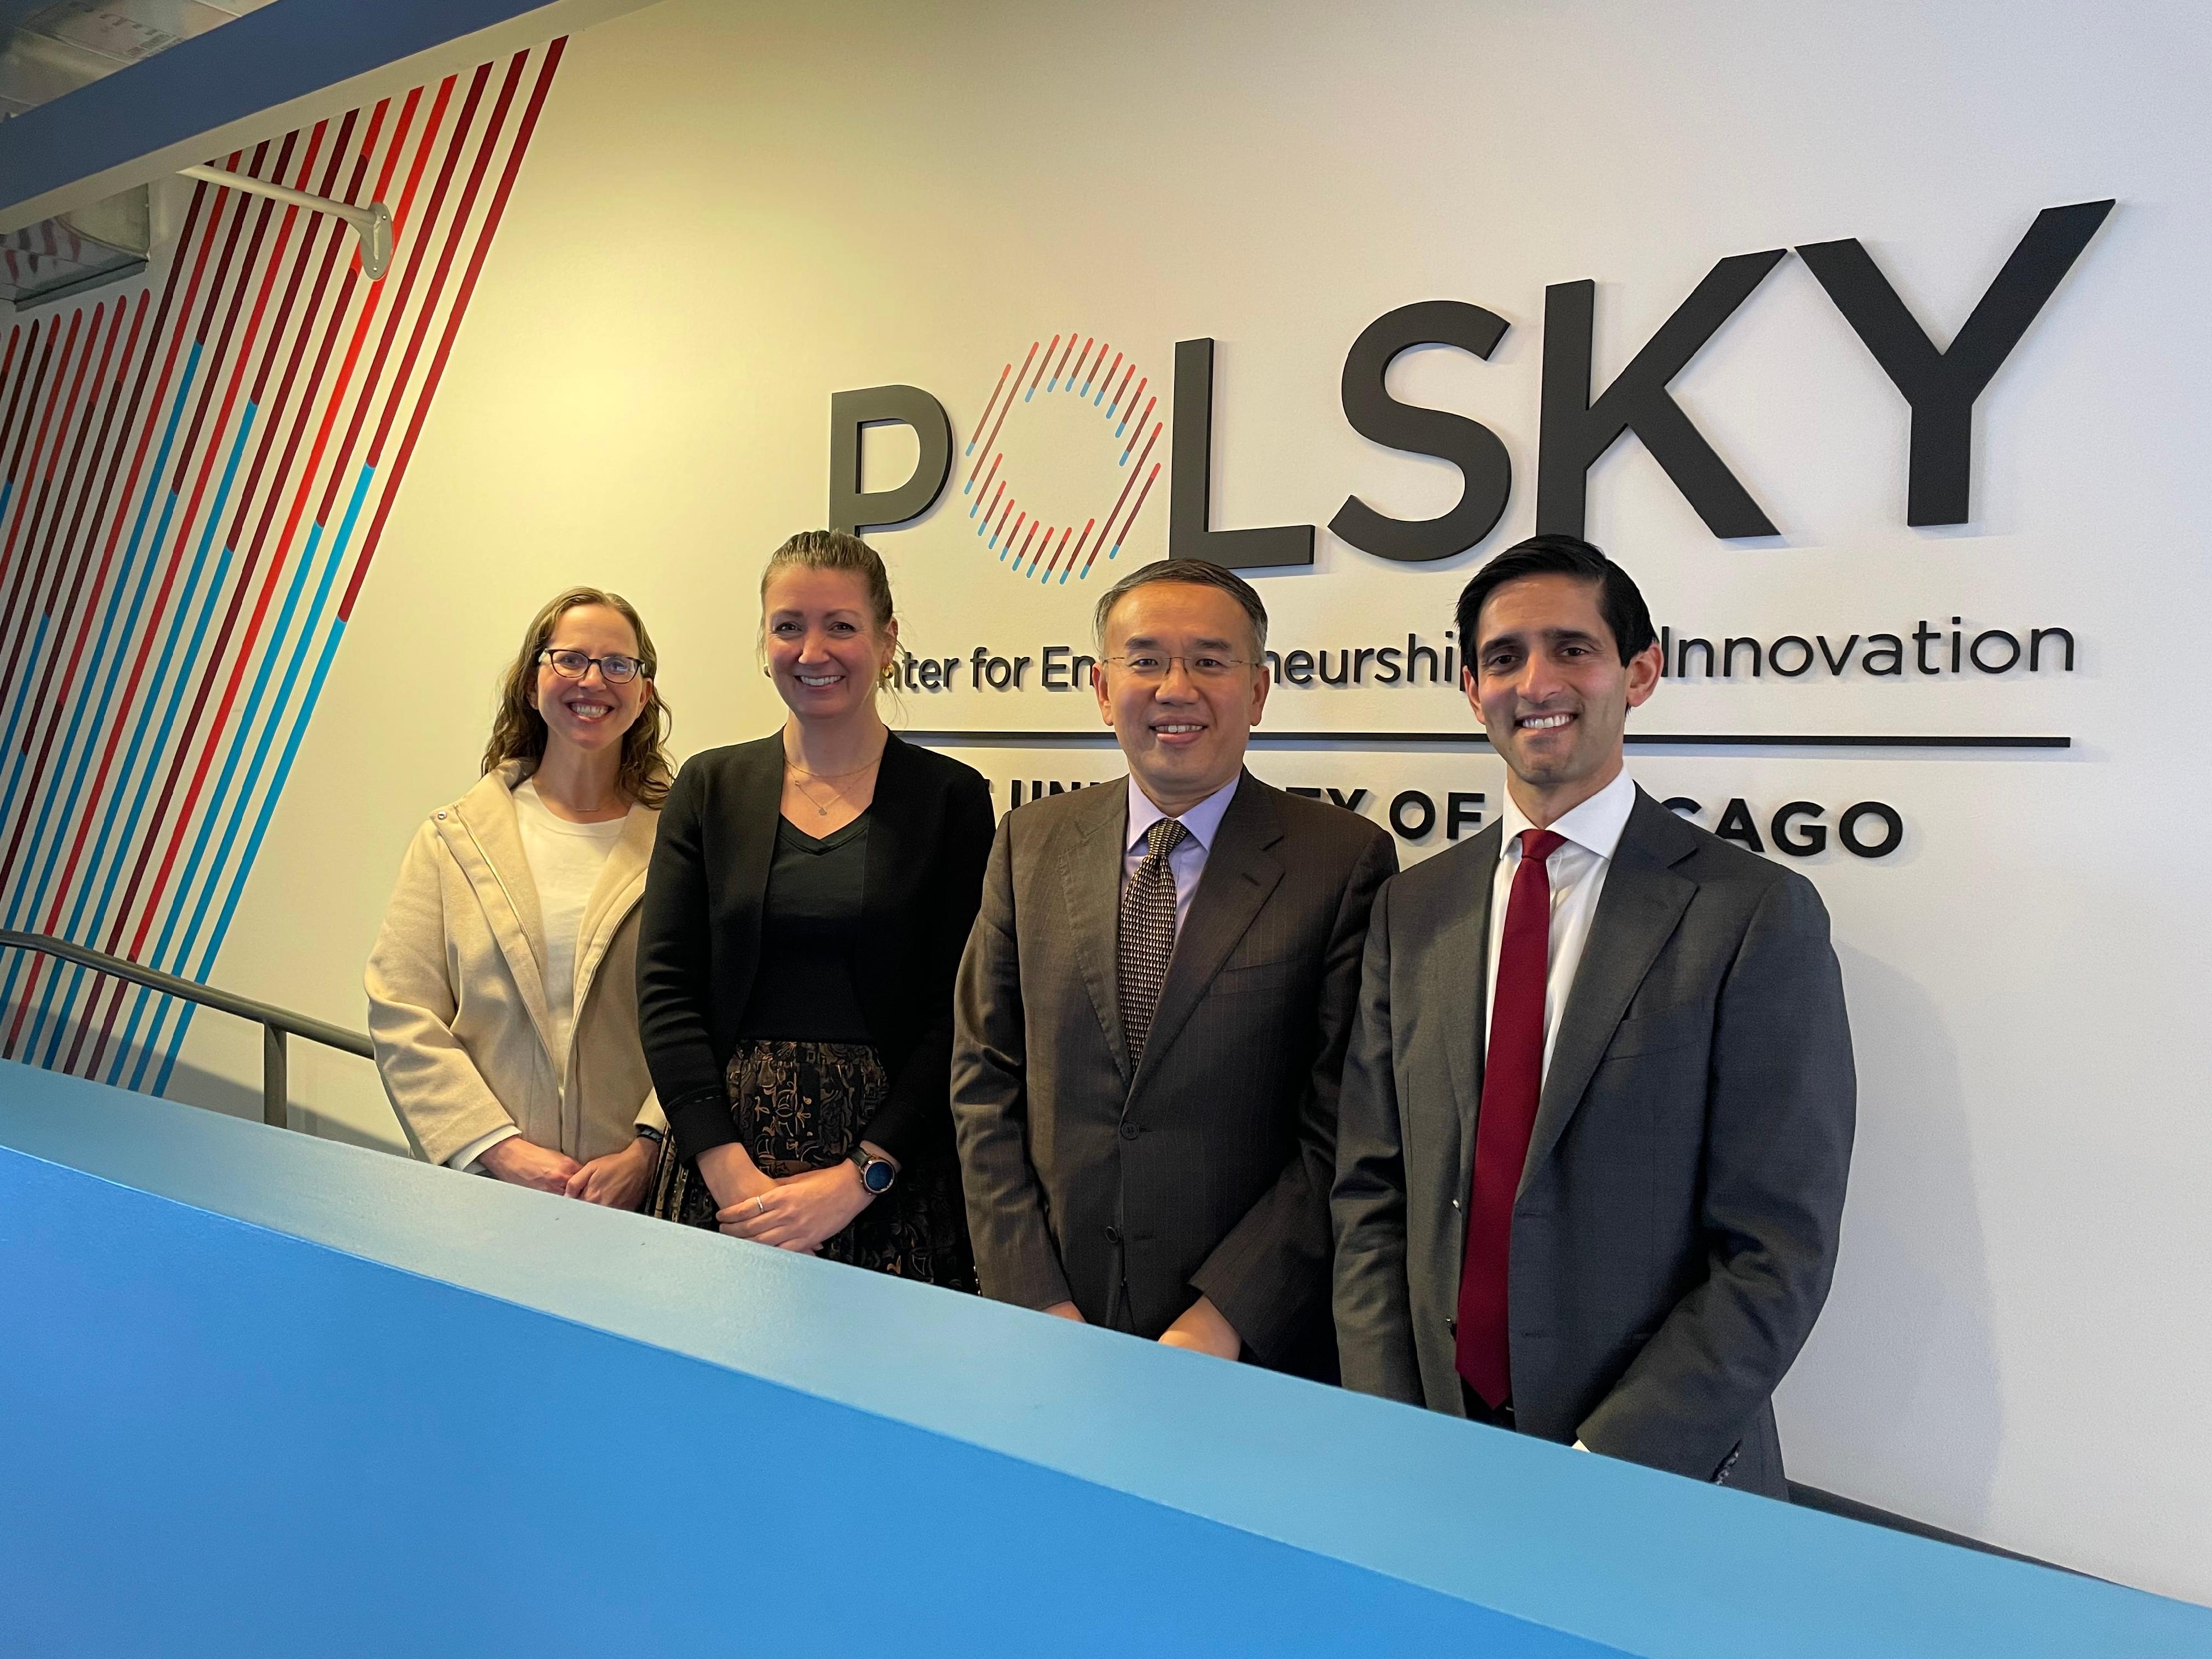 The Secretary for Financial Services and the Treasury, Mr Christopher Hui, yesterday (April 11, Chicago time) continued his visit to the United States. Photo shows Mr Hui (second right) touring the Polsky Center for Entrepreneurship and Innovation at Chicago Booth with the Managing Director of the center, Mr Samir Mayekar (first right).